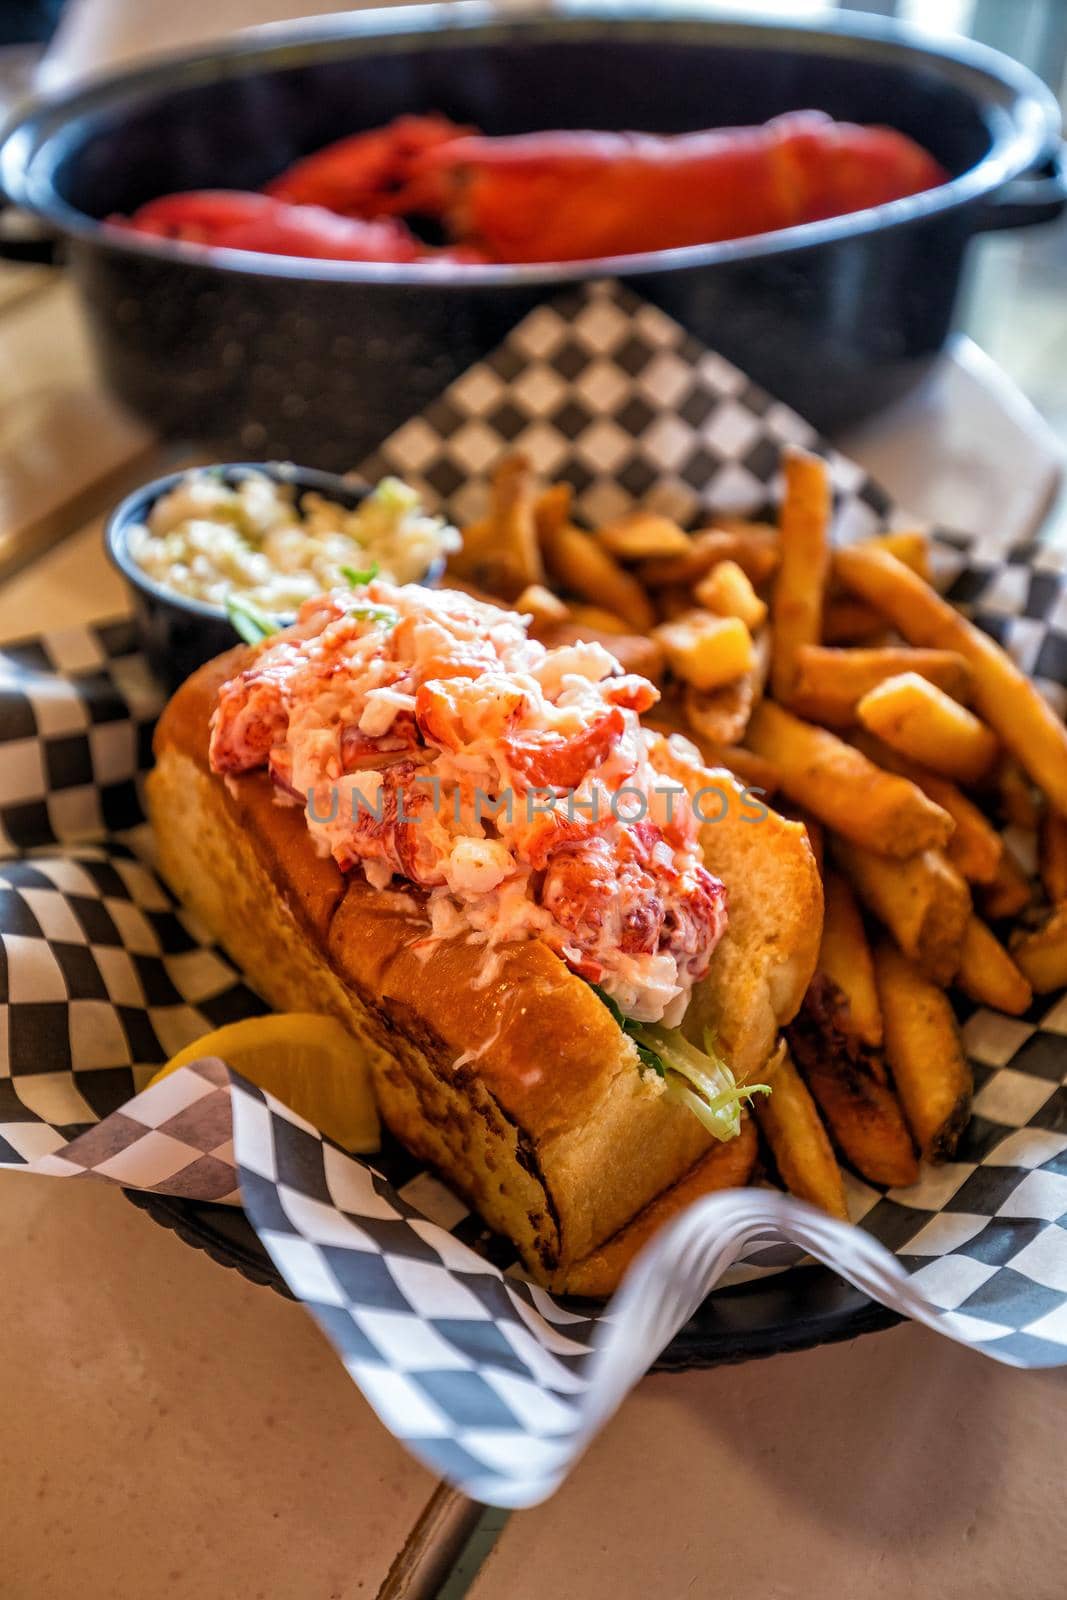 Maine lobster roll by f11photo